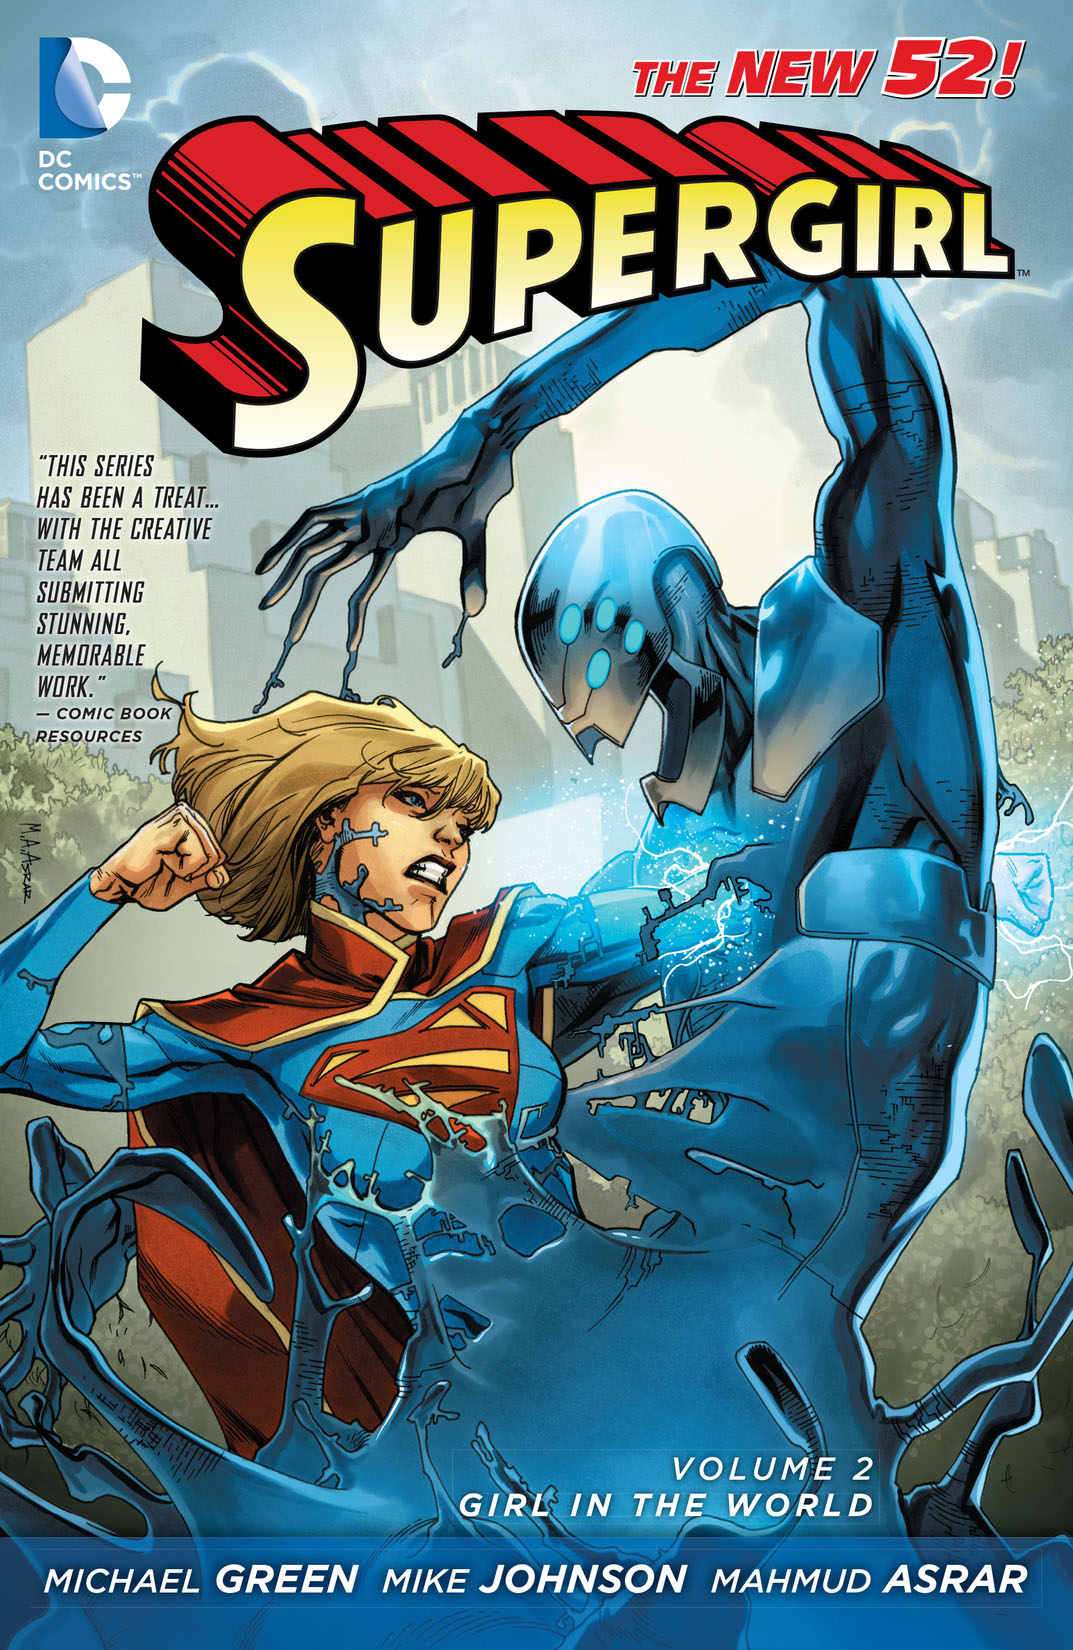 Supergirl Vol. 2: Girl in the World preview images